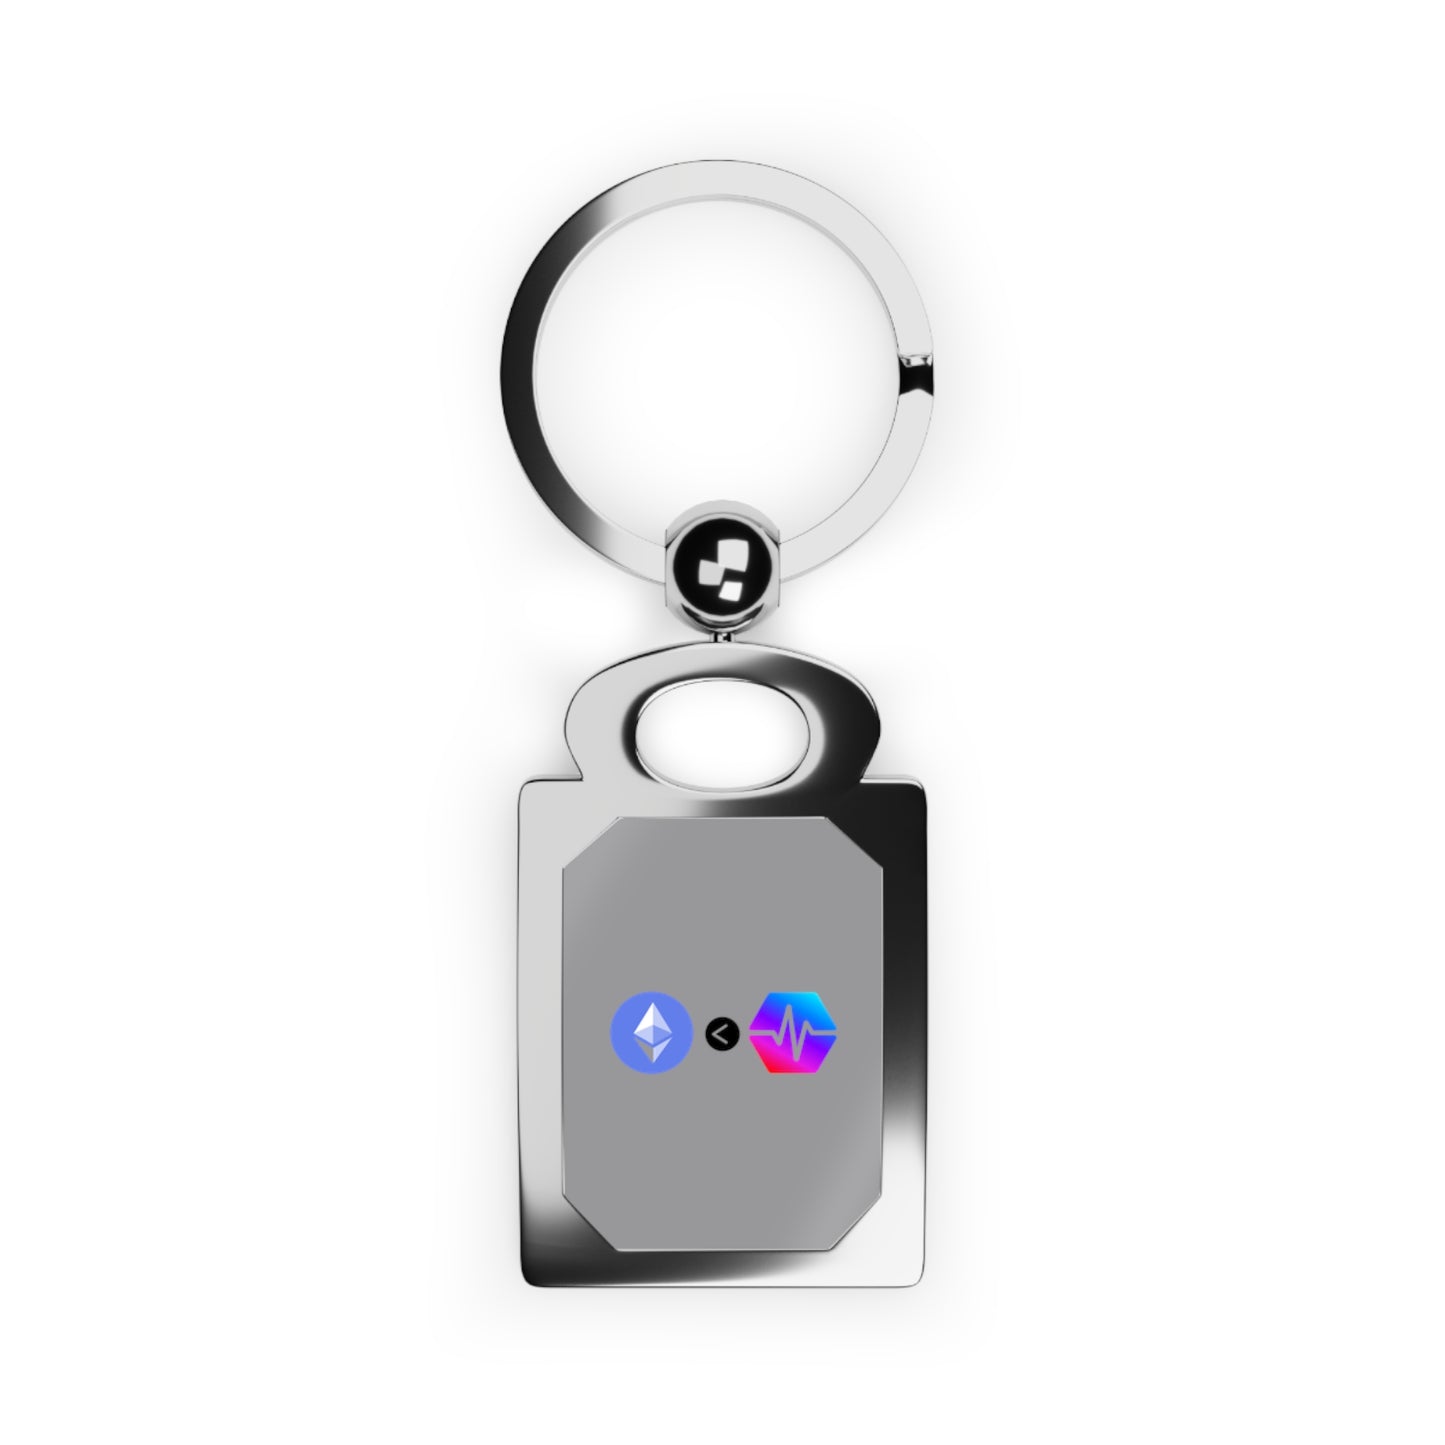 Pulse Chain is real DeFi Key ring